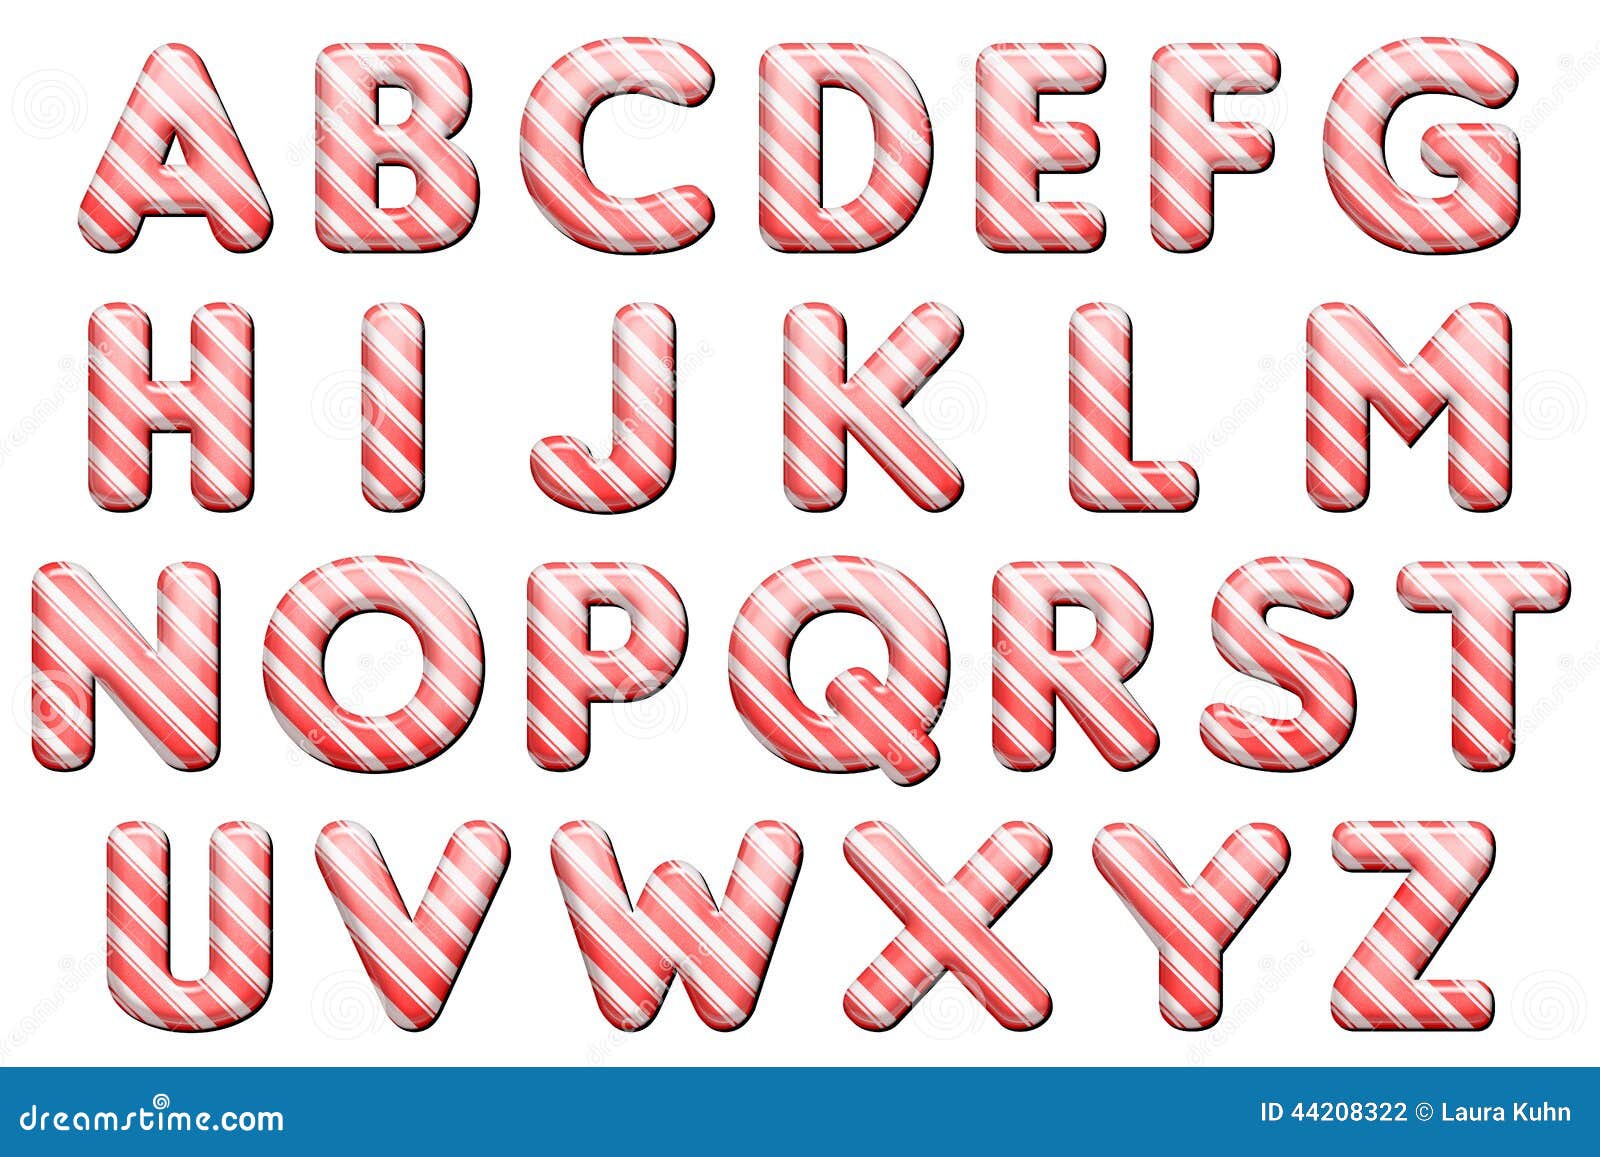 Candyland Letters Printable That are Vibrant Clifton Blog